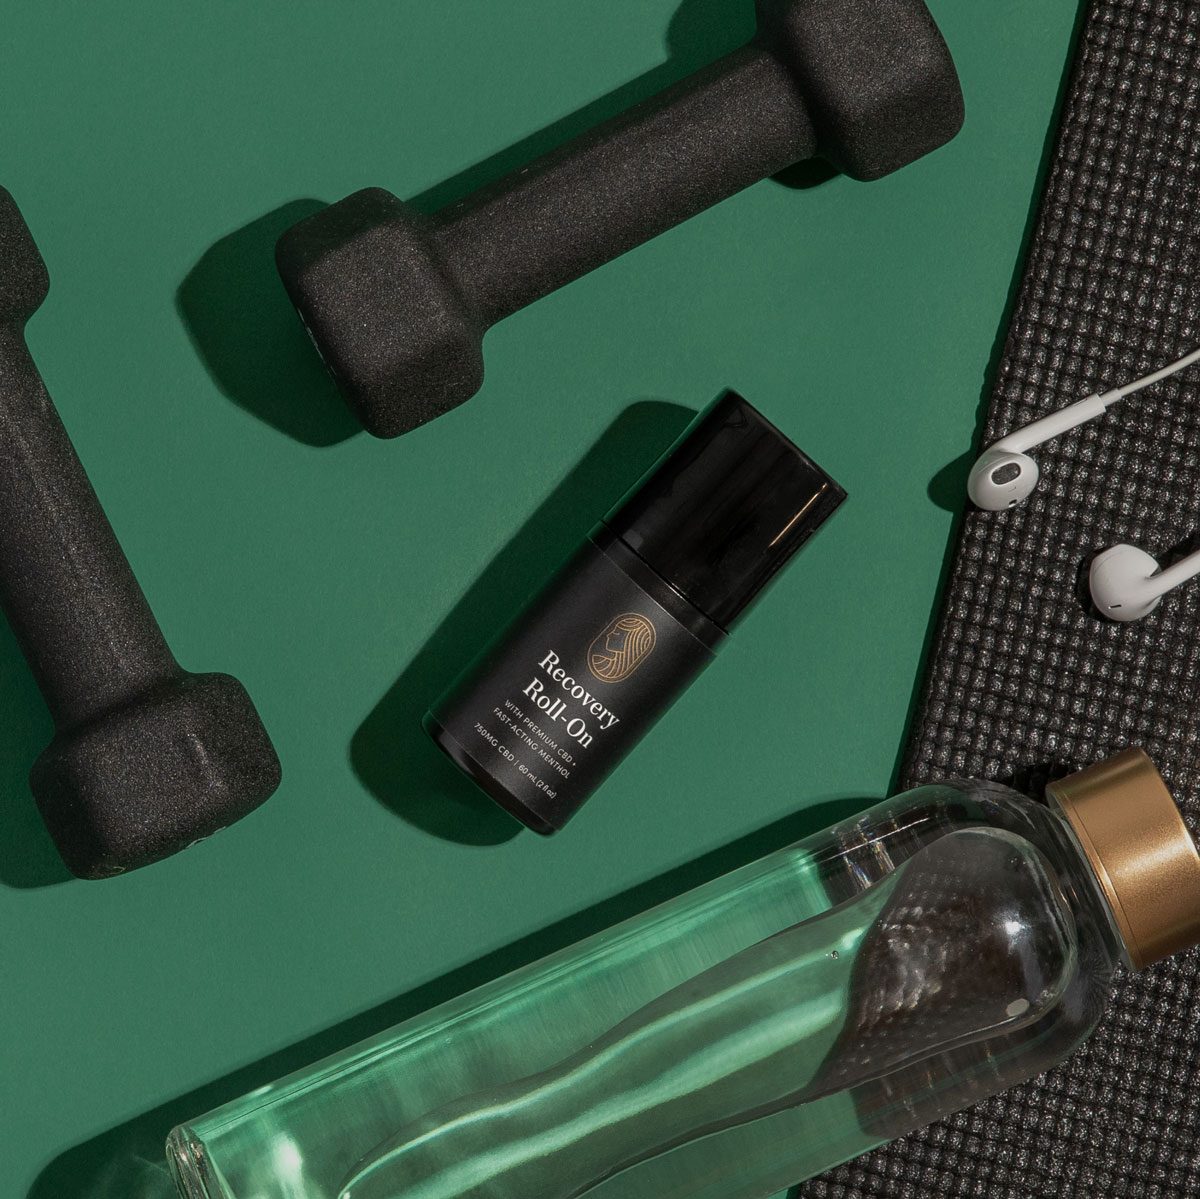 Green backgound image showing Recovery Roll-On, handweights, earbuds, a yogamat, and water bottle.